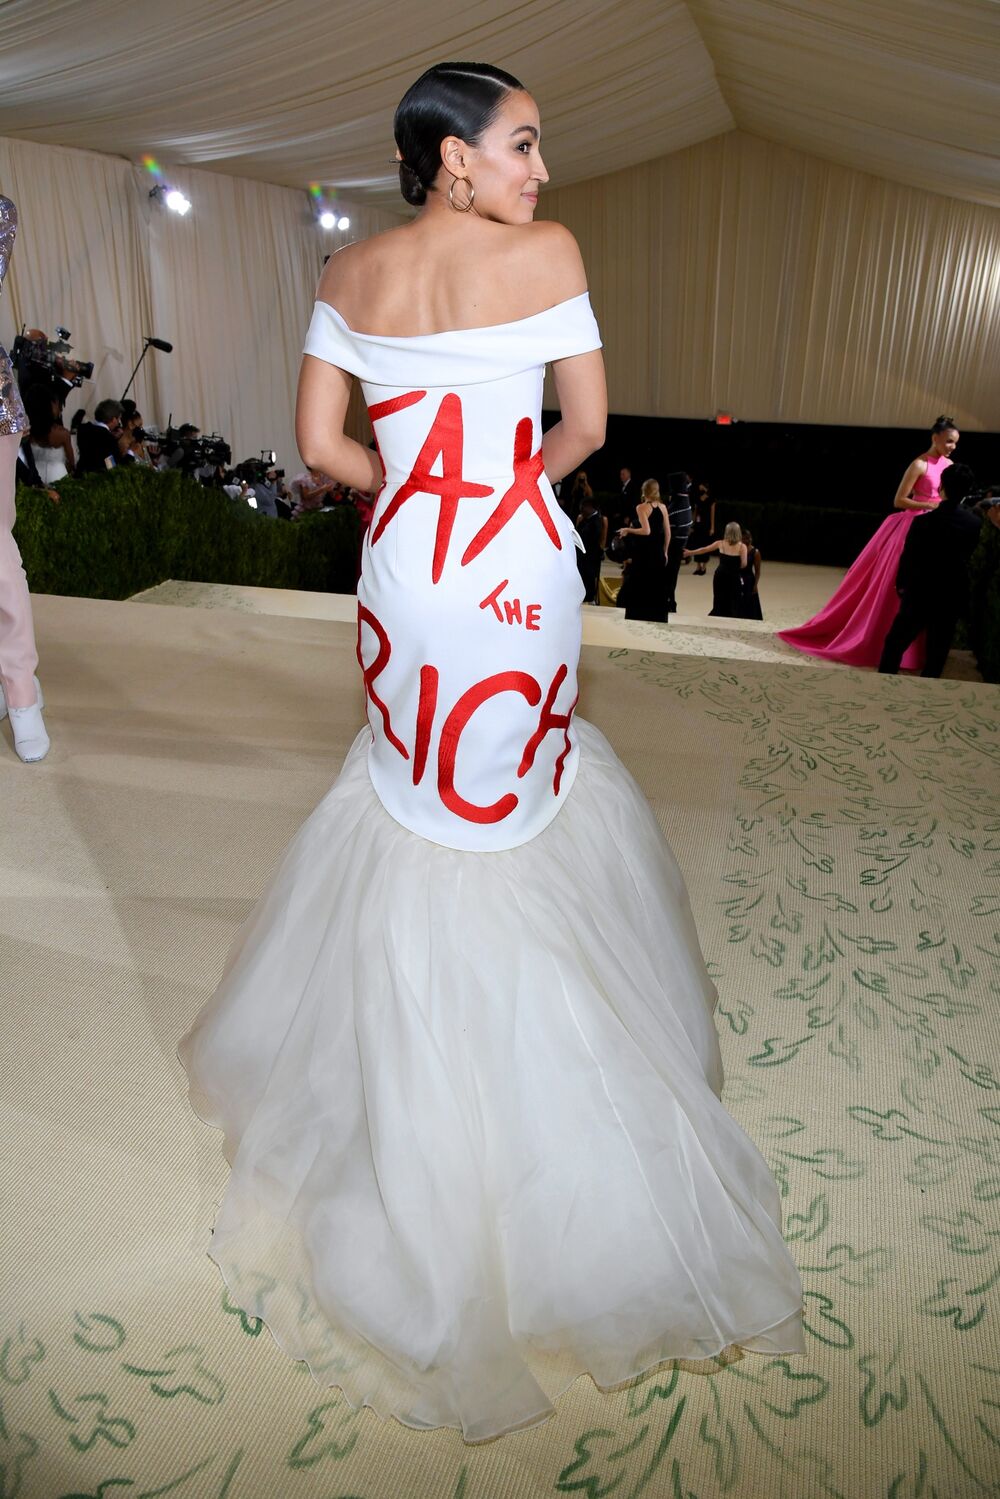 AOC Wears 'Tax the Rich' Dress to Met Gala Where Tickets Cost $35,000 -  Bloomberg